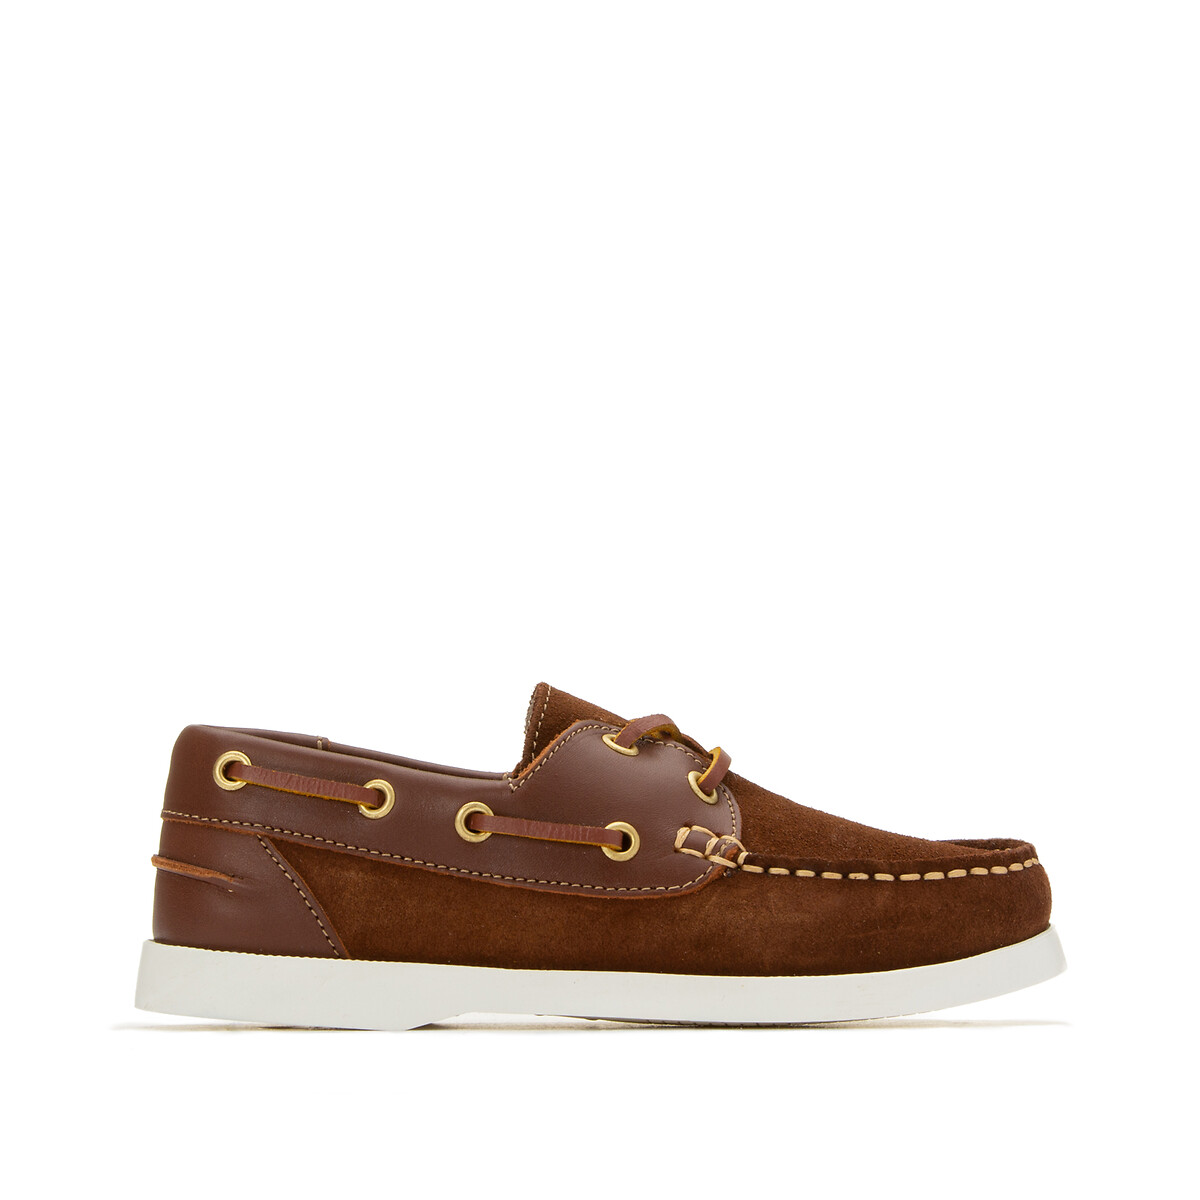 Aggregate more than 83 childrens boat shoes super hot